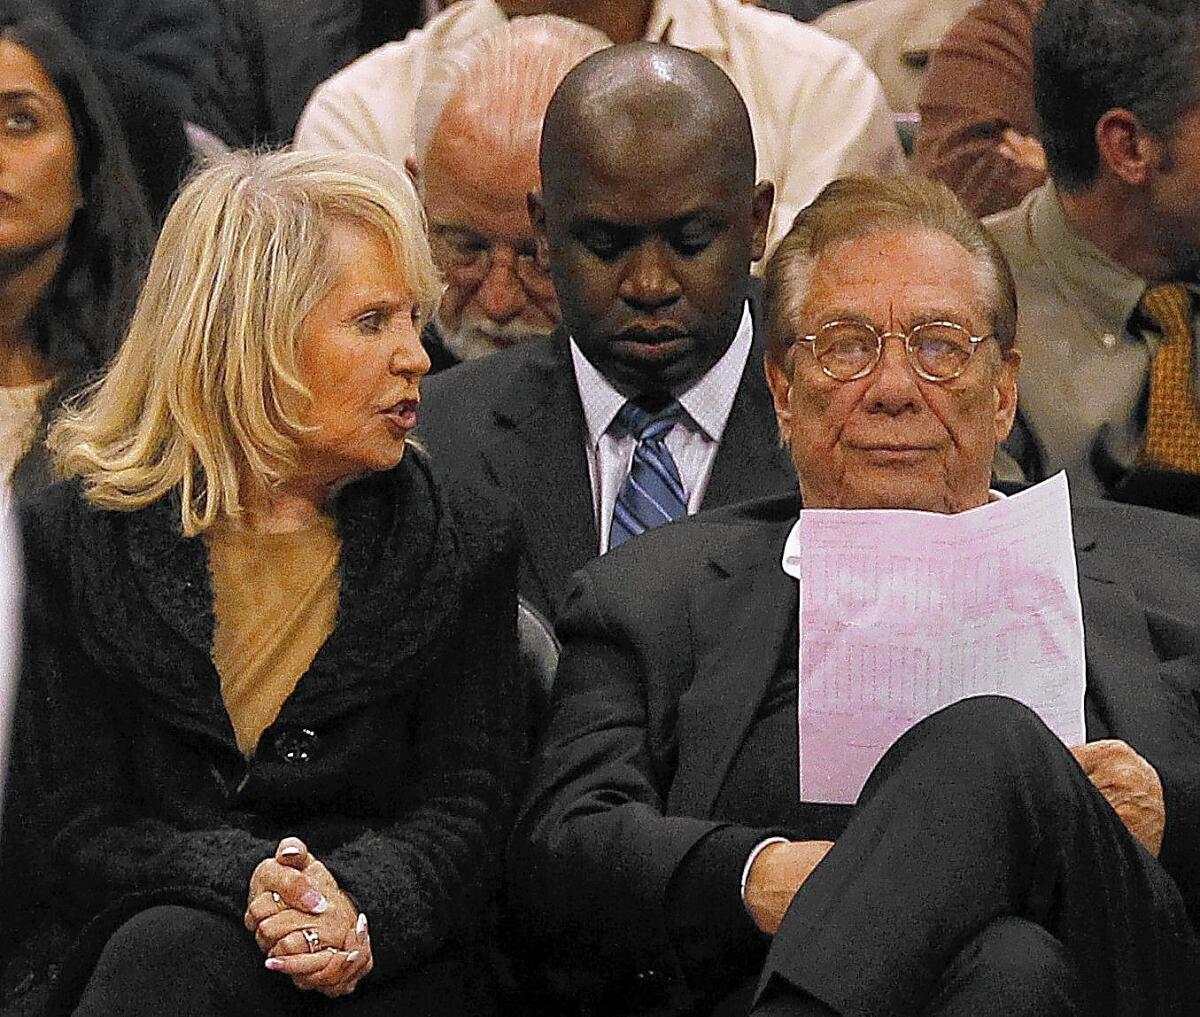 Shelly Sterling is reportedly trying to sell the Clippers in advance of a Tuesday deadline, when the 30 pro basketball teams will vote on whether to strip control of the team from her and Donald Sterling.